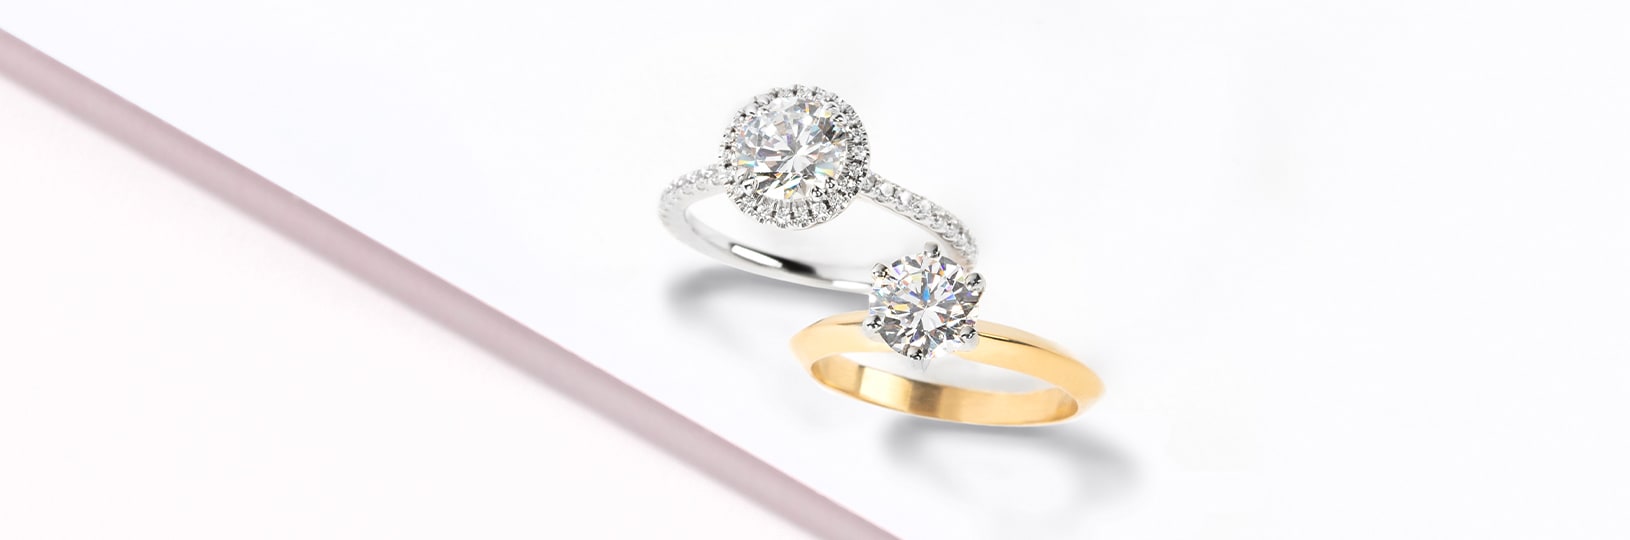 Simple engagement ring styles